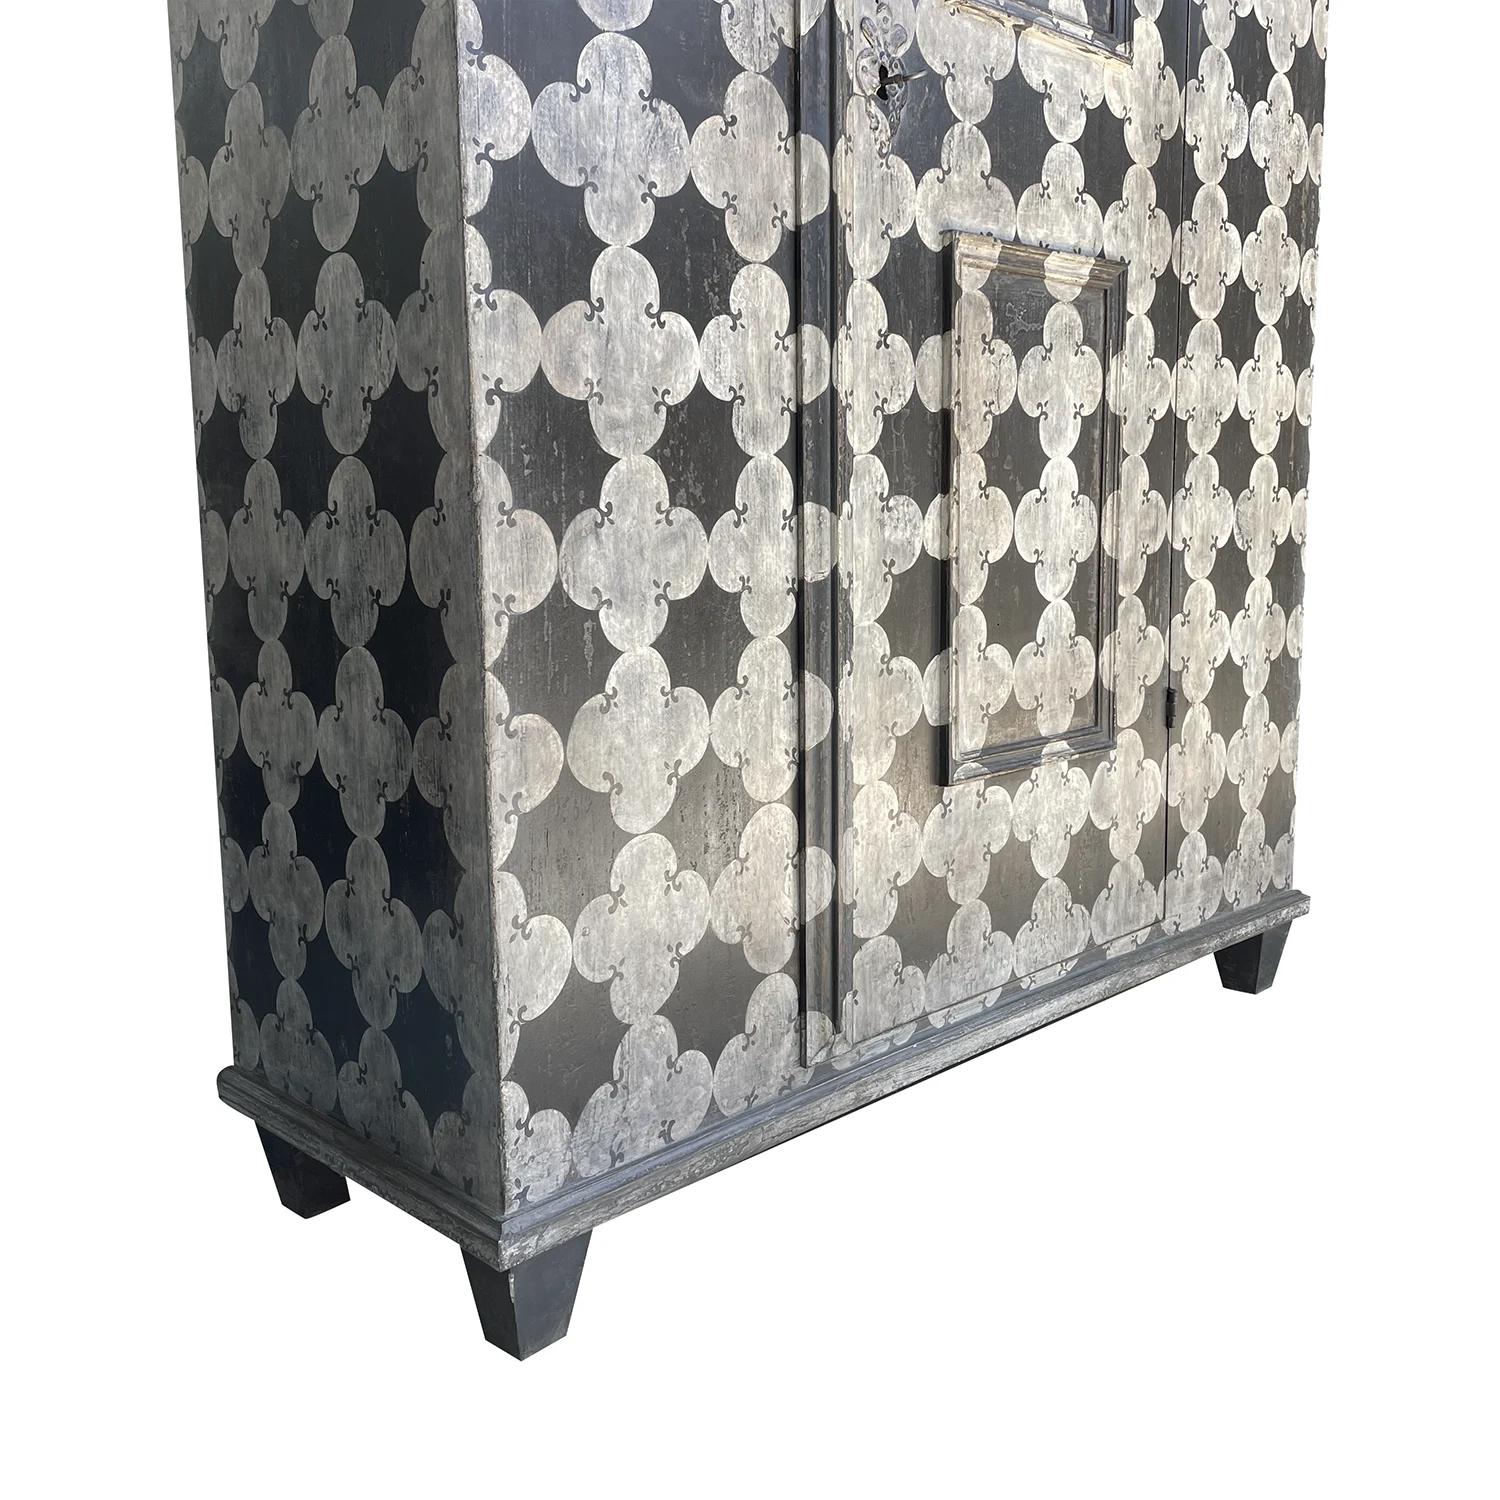 Metal 19th Century Black-White Italian Painted Pine Cabinet, Antique Tuscan Cupboard For Sale